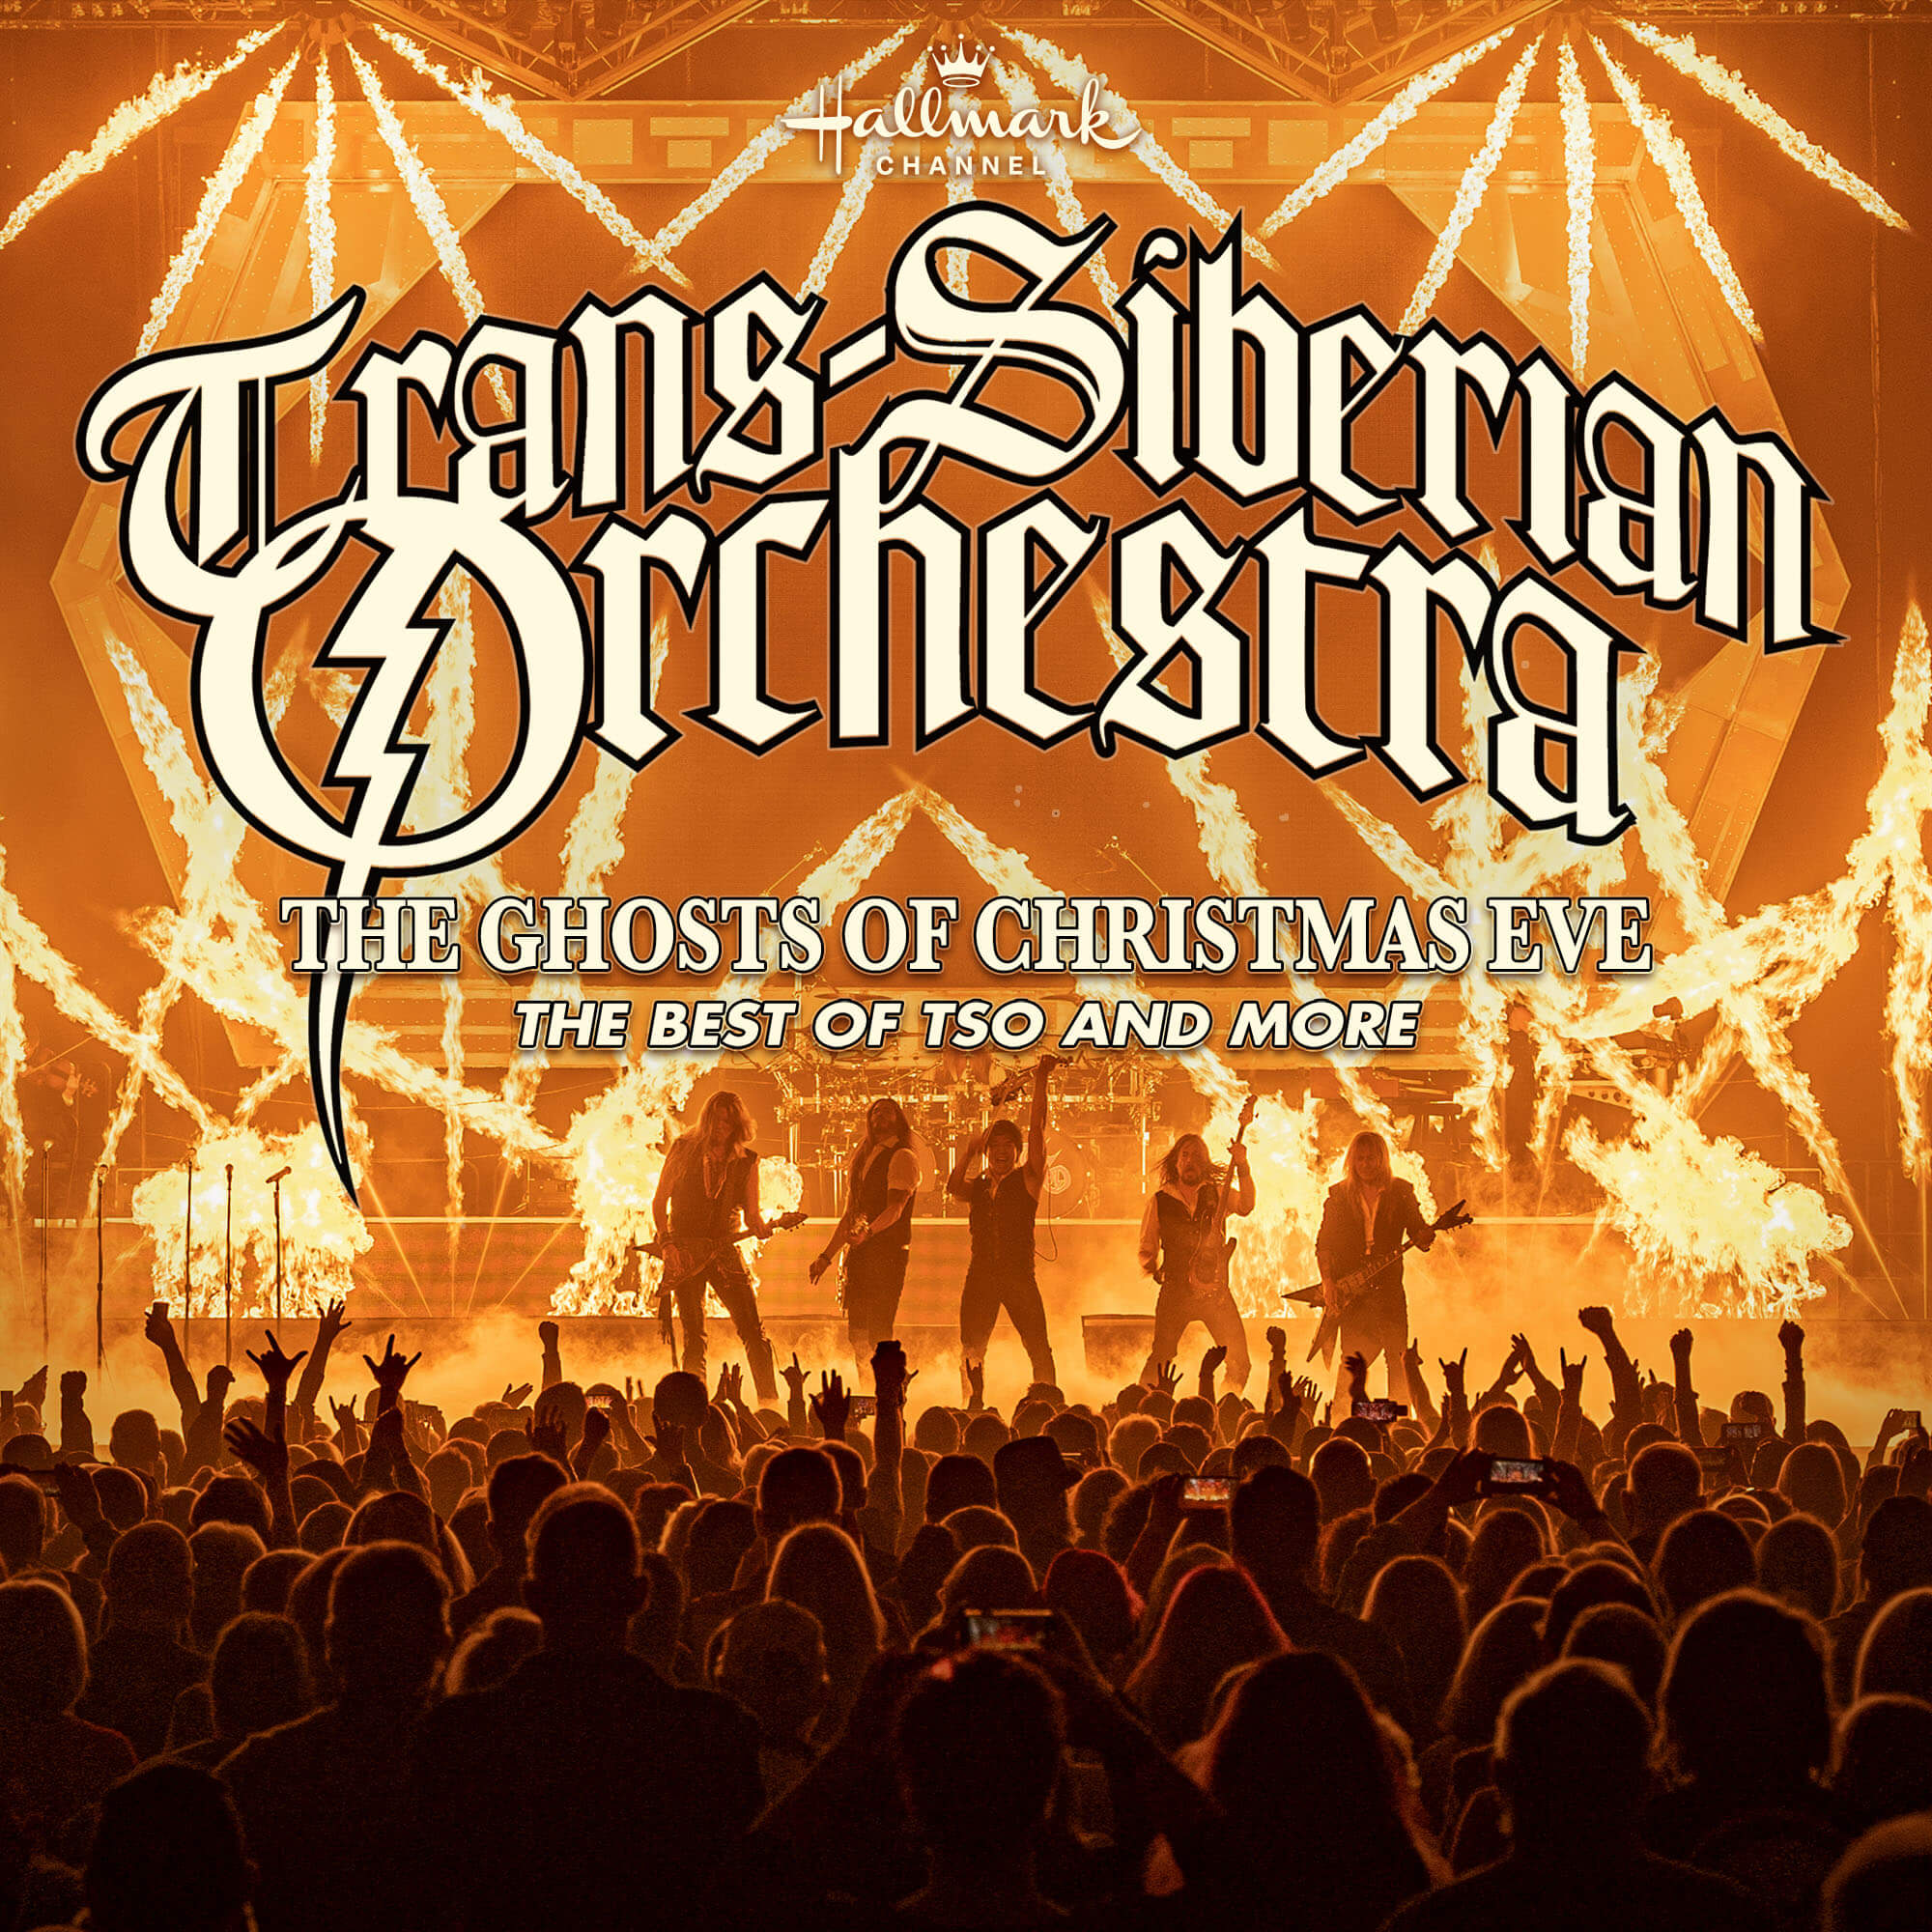 Trans-Siberian Orchestra The Ghosts of Christmas Eve - Benefiting Cardinal Glennon